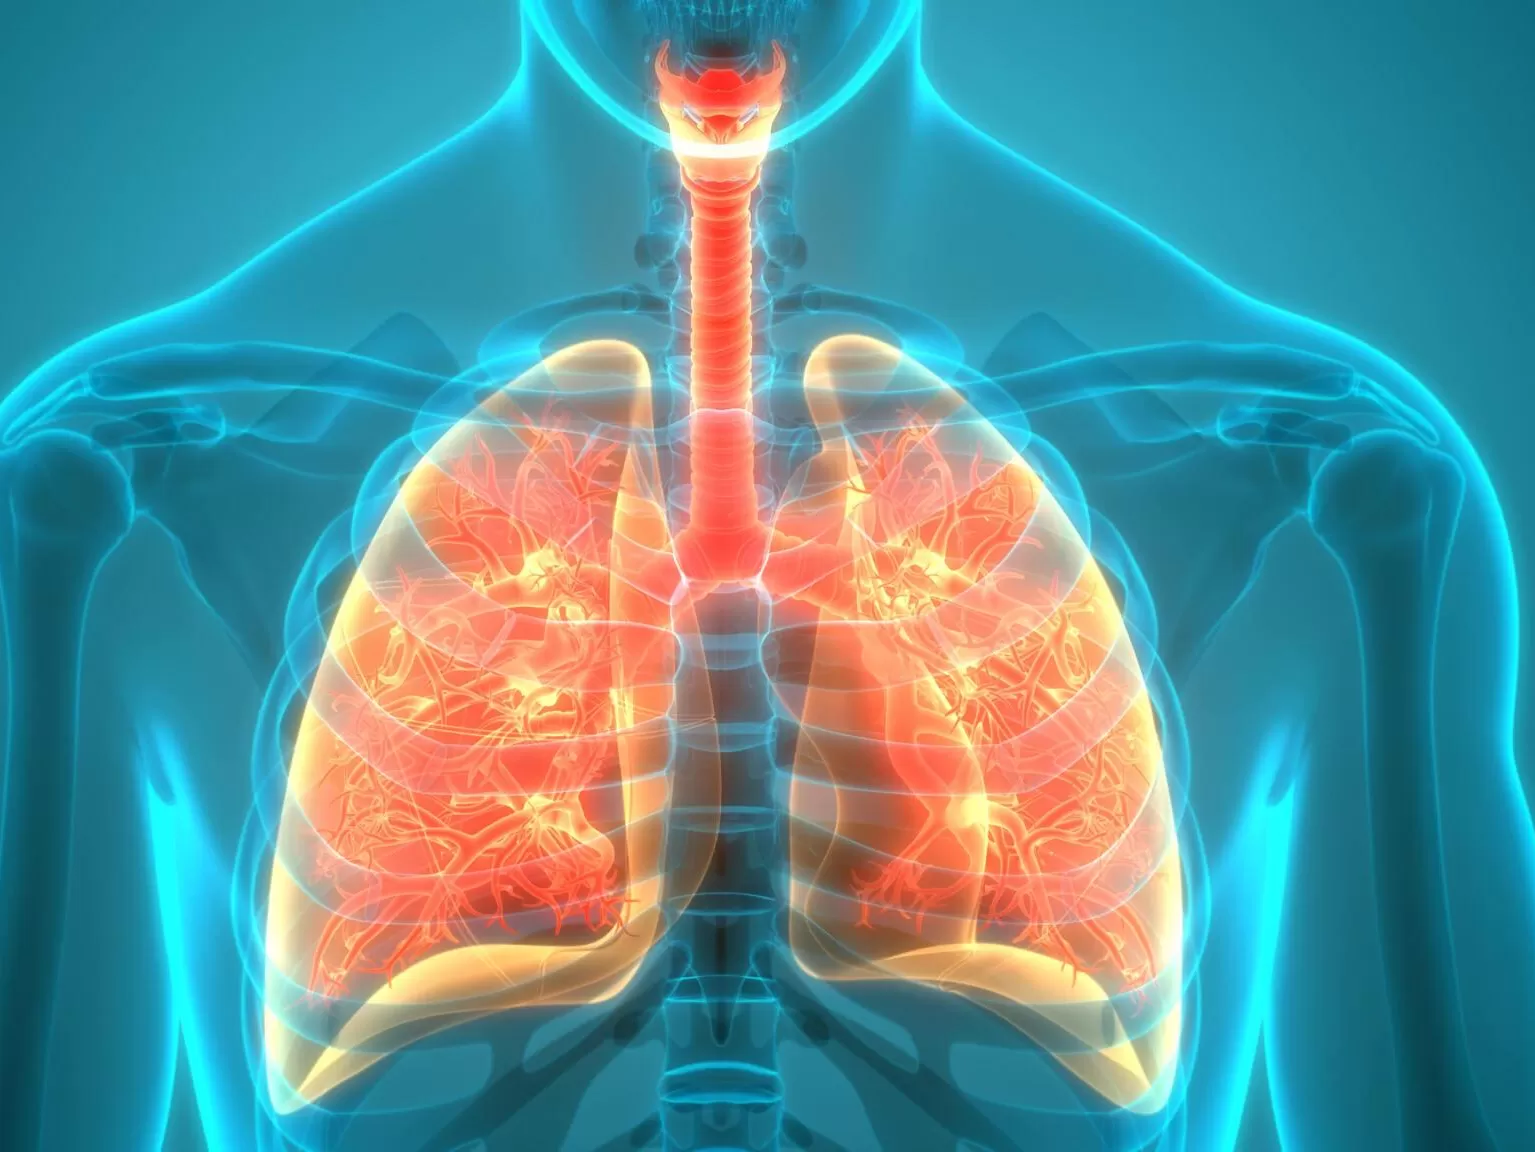 Respiratory conditions like asthma, COPD, pneumonia, and lung cancer, treatment at Rudraksha Multispeciality Hospitals